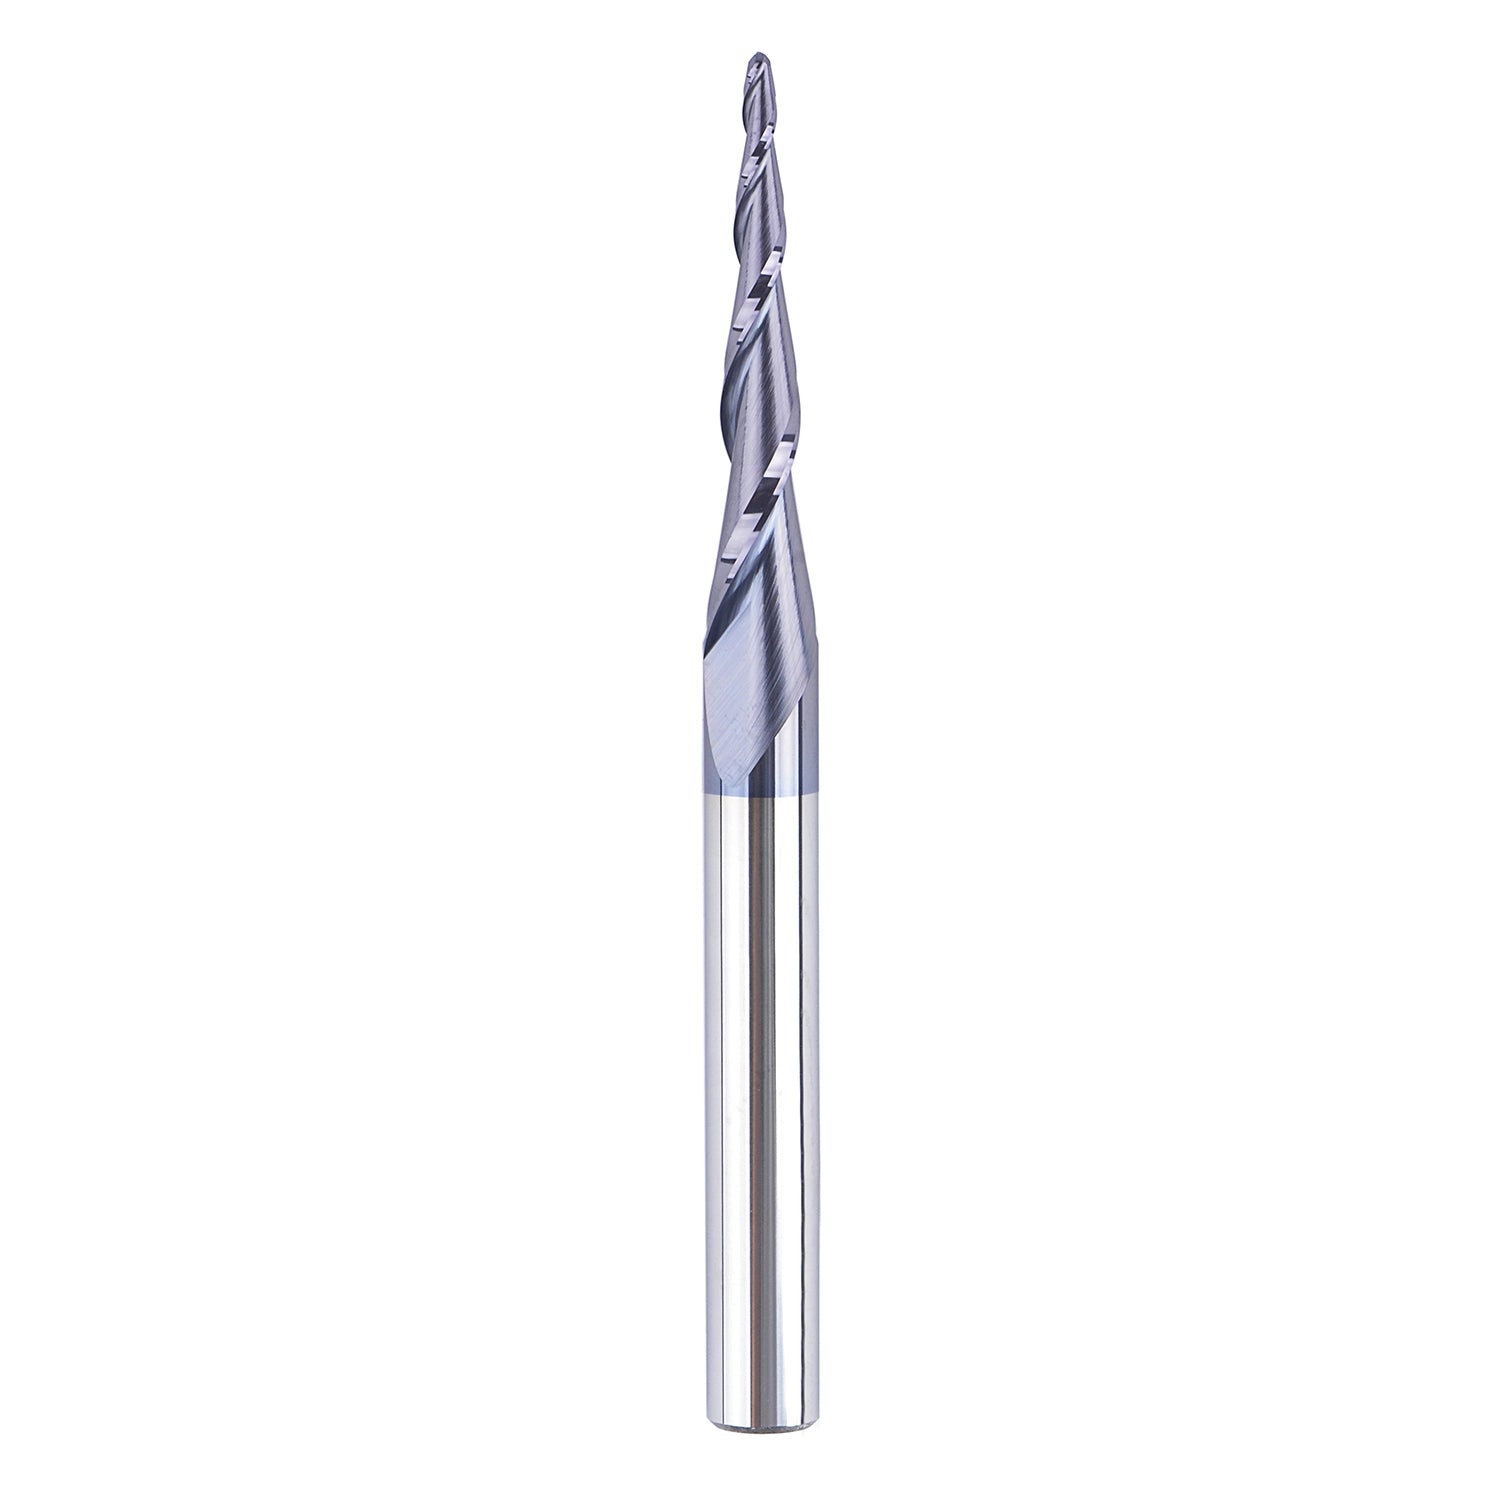 SpeTool 0.75mm Radius Tapered Ball Nose CNC Endmill TiAlN Coated For Engraving